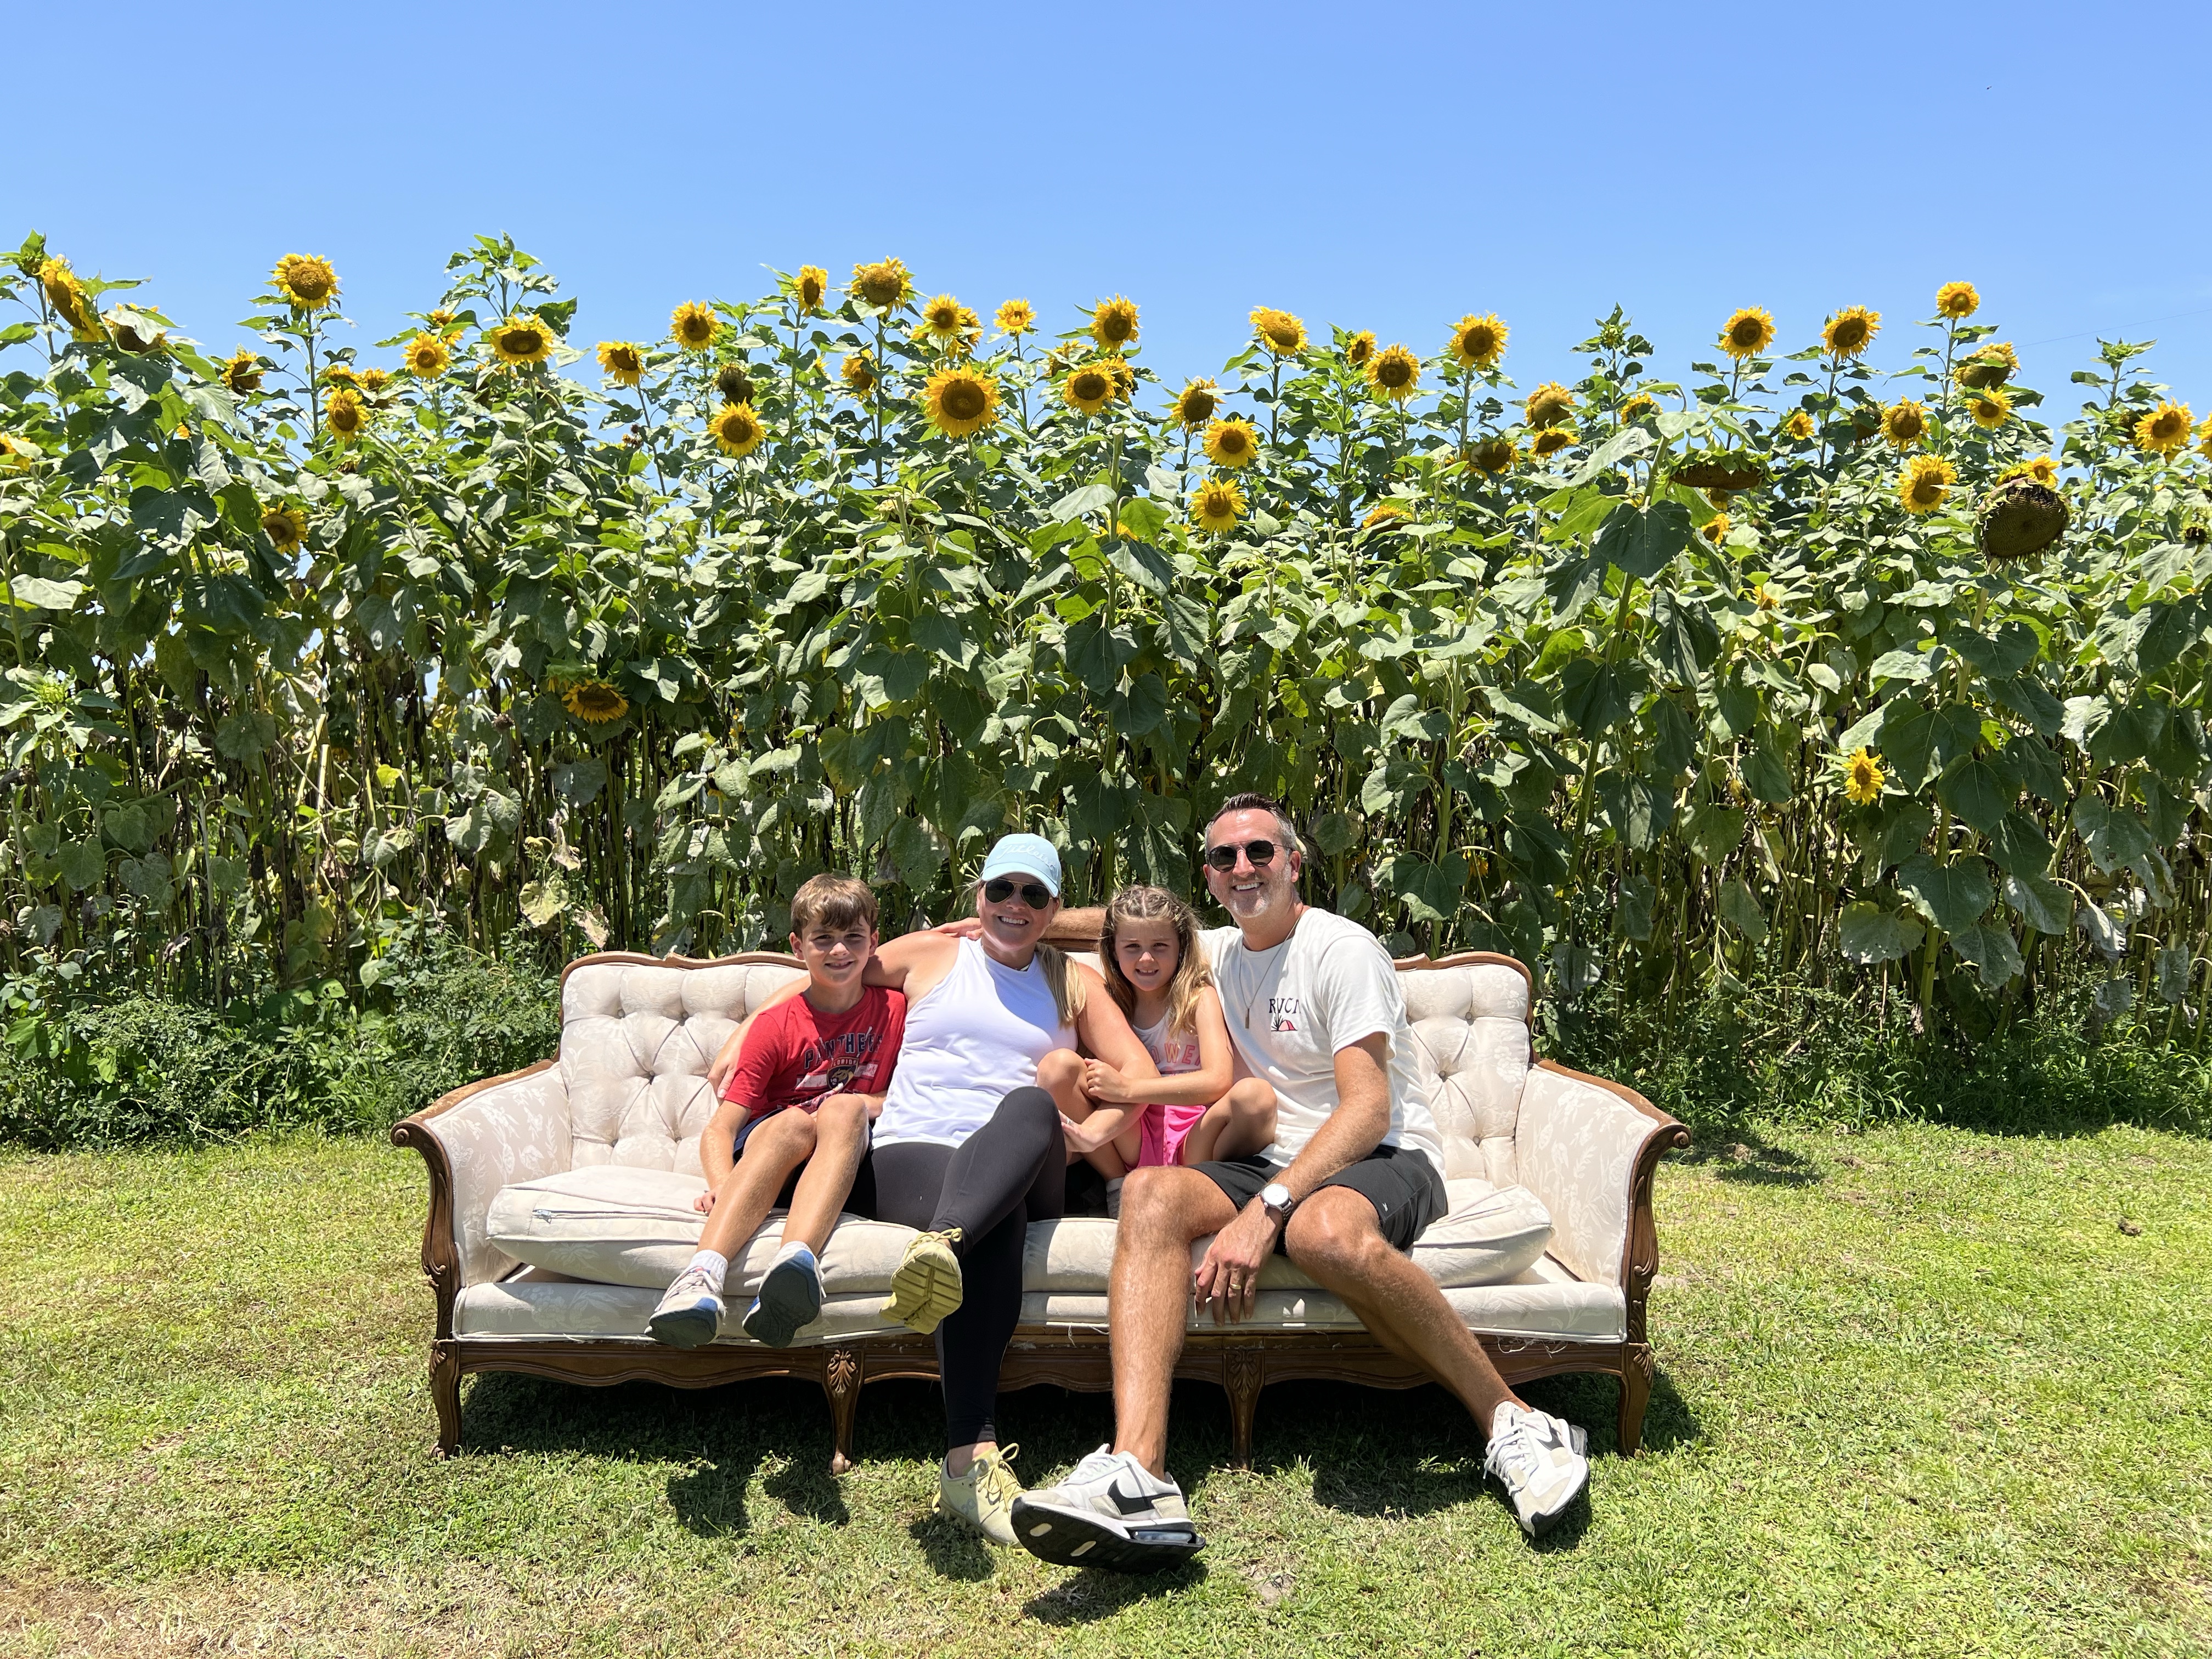 A Sweet Escape: Exploring Sweetfields Farm with the Family!